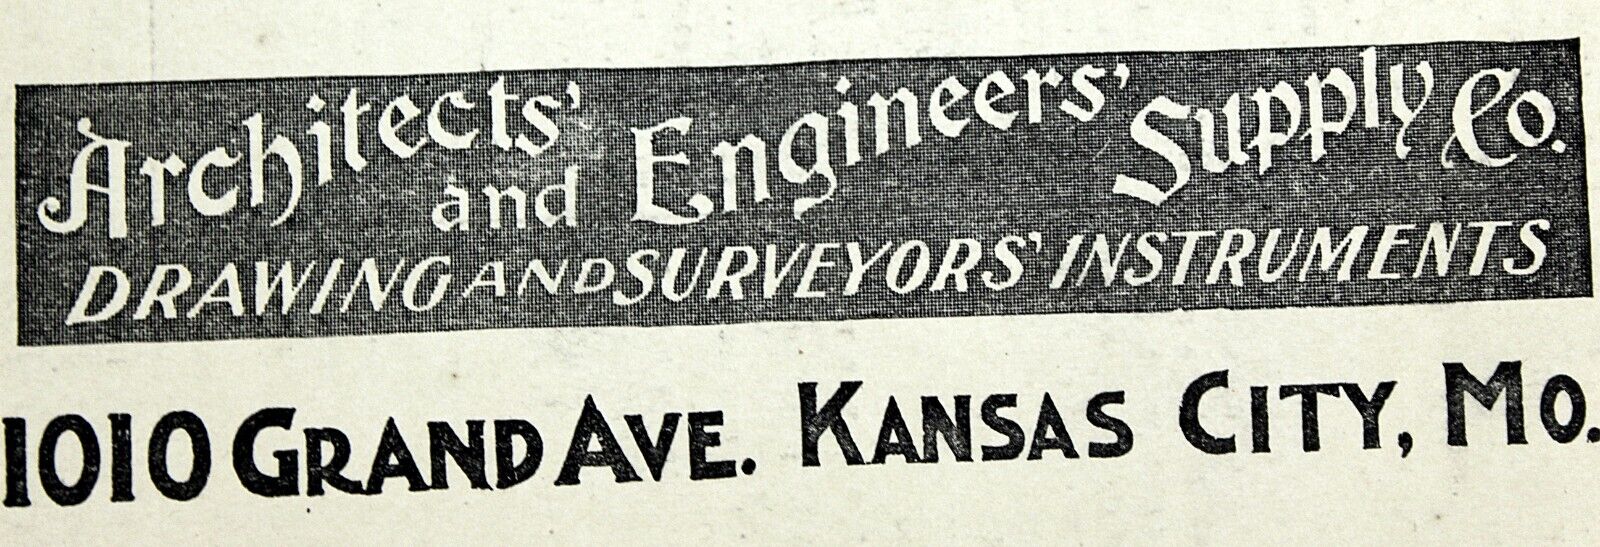 1880s-1900 ARCHITECTS and ENGINEERS SUPPLY CO Victorian Business Card KC Mo